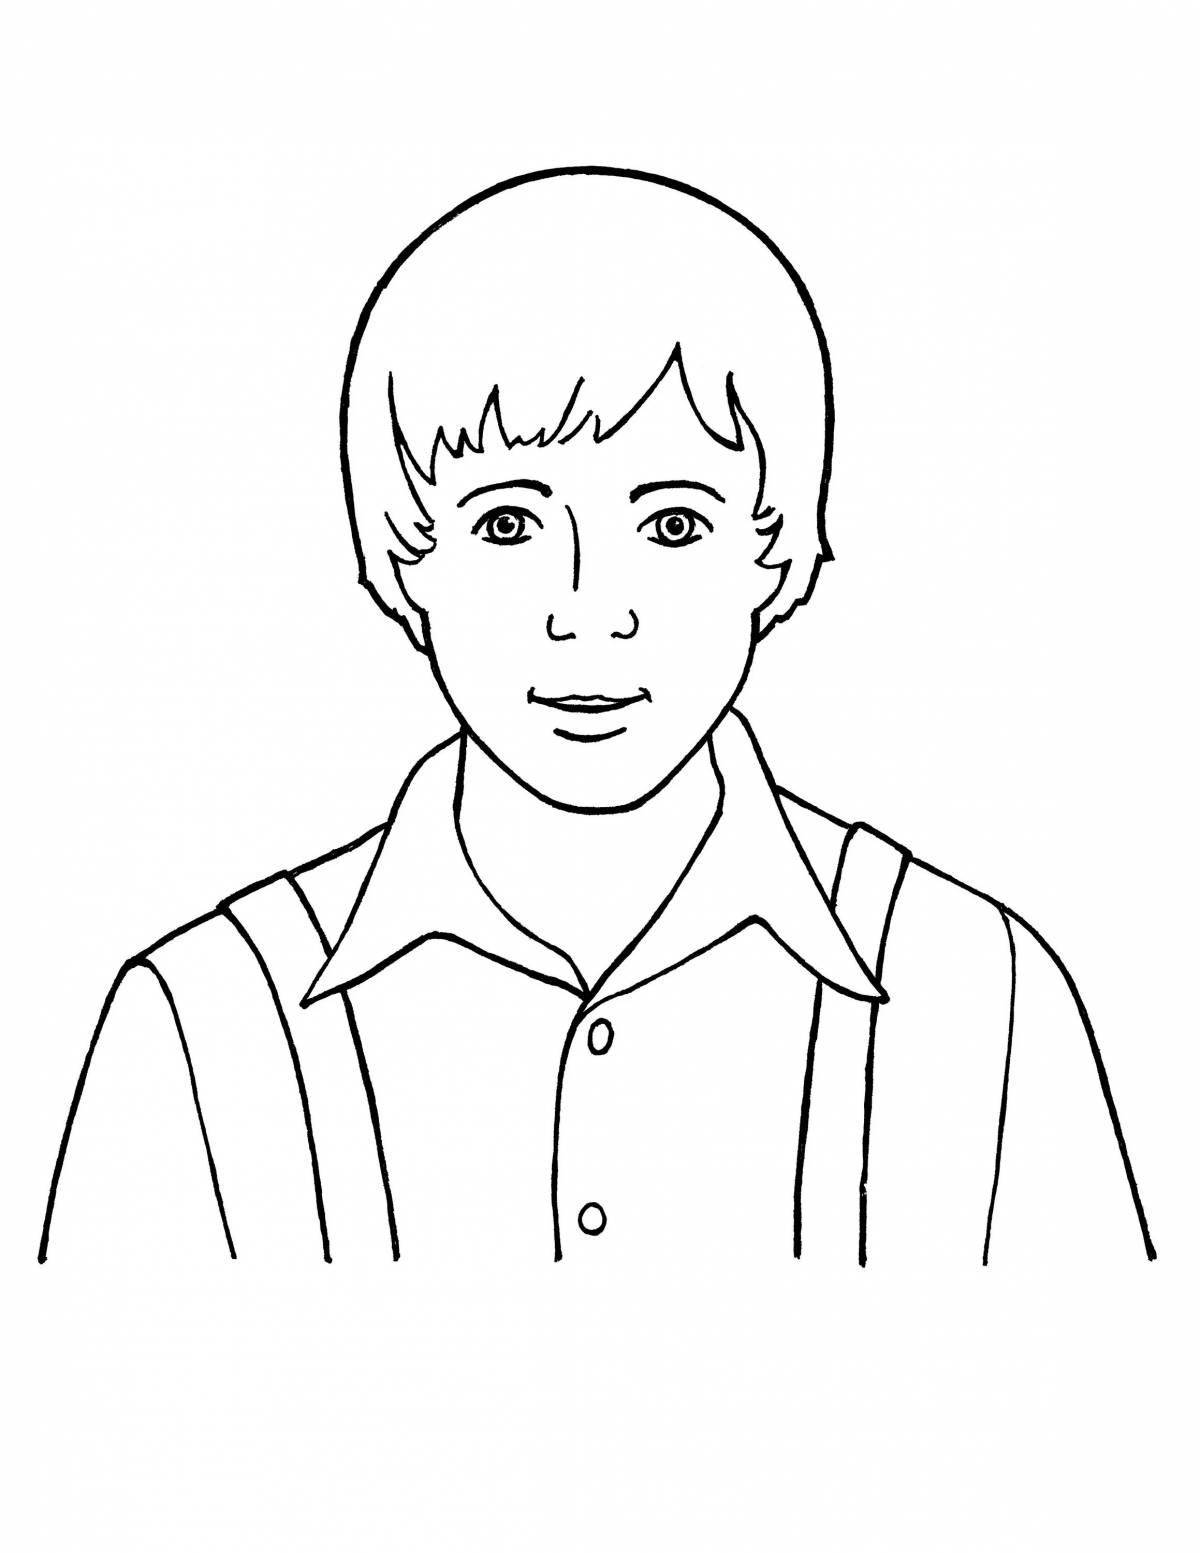 Coloring book cheerful man for children